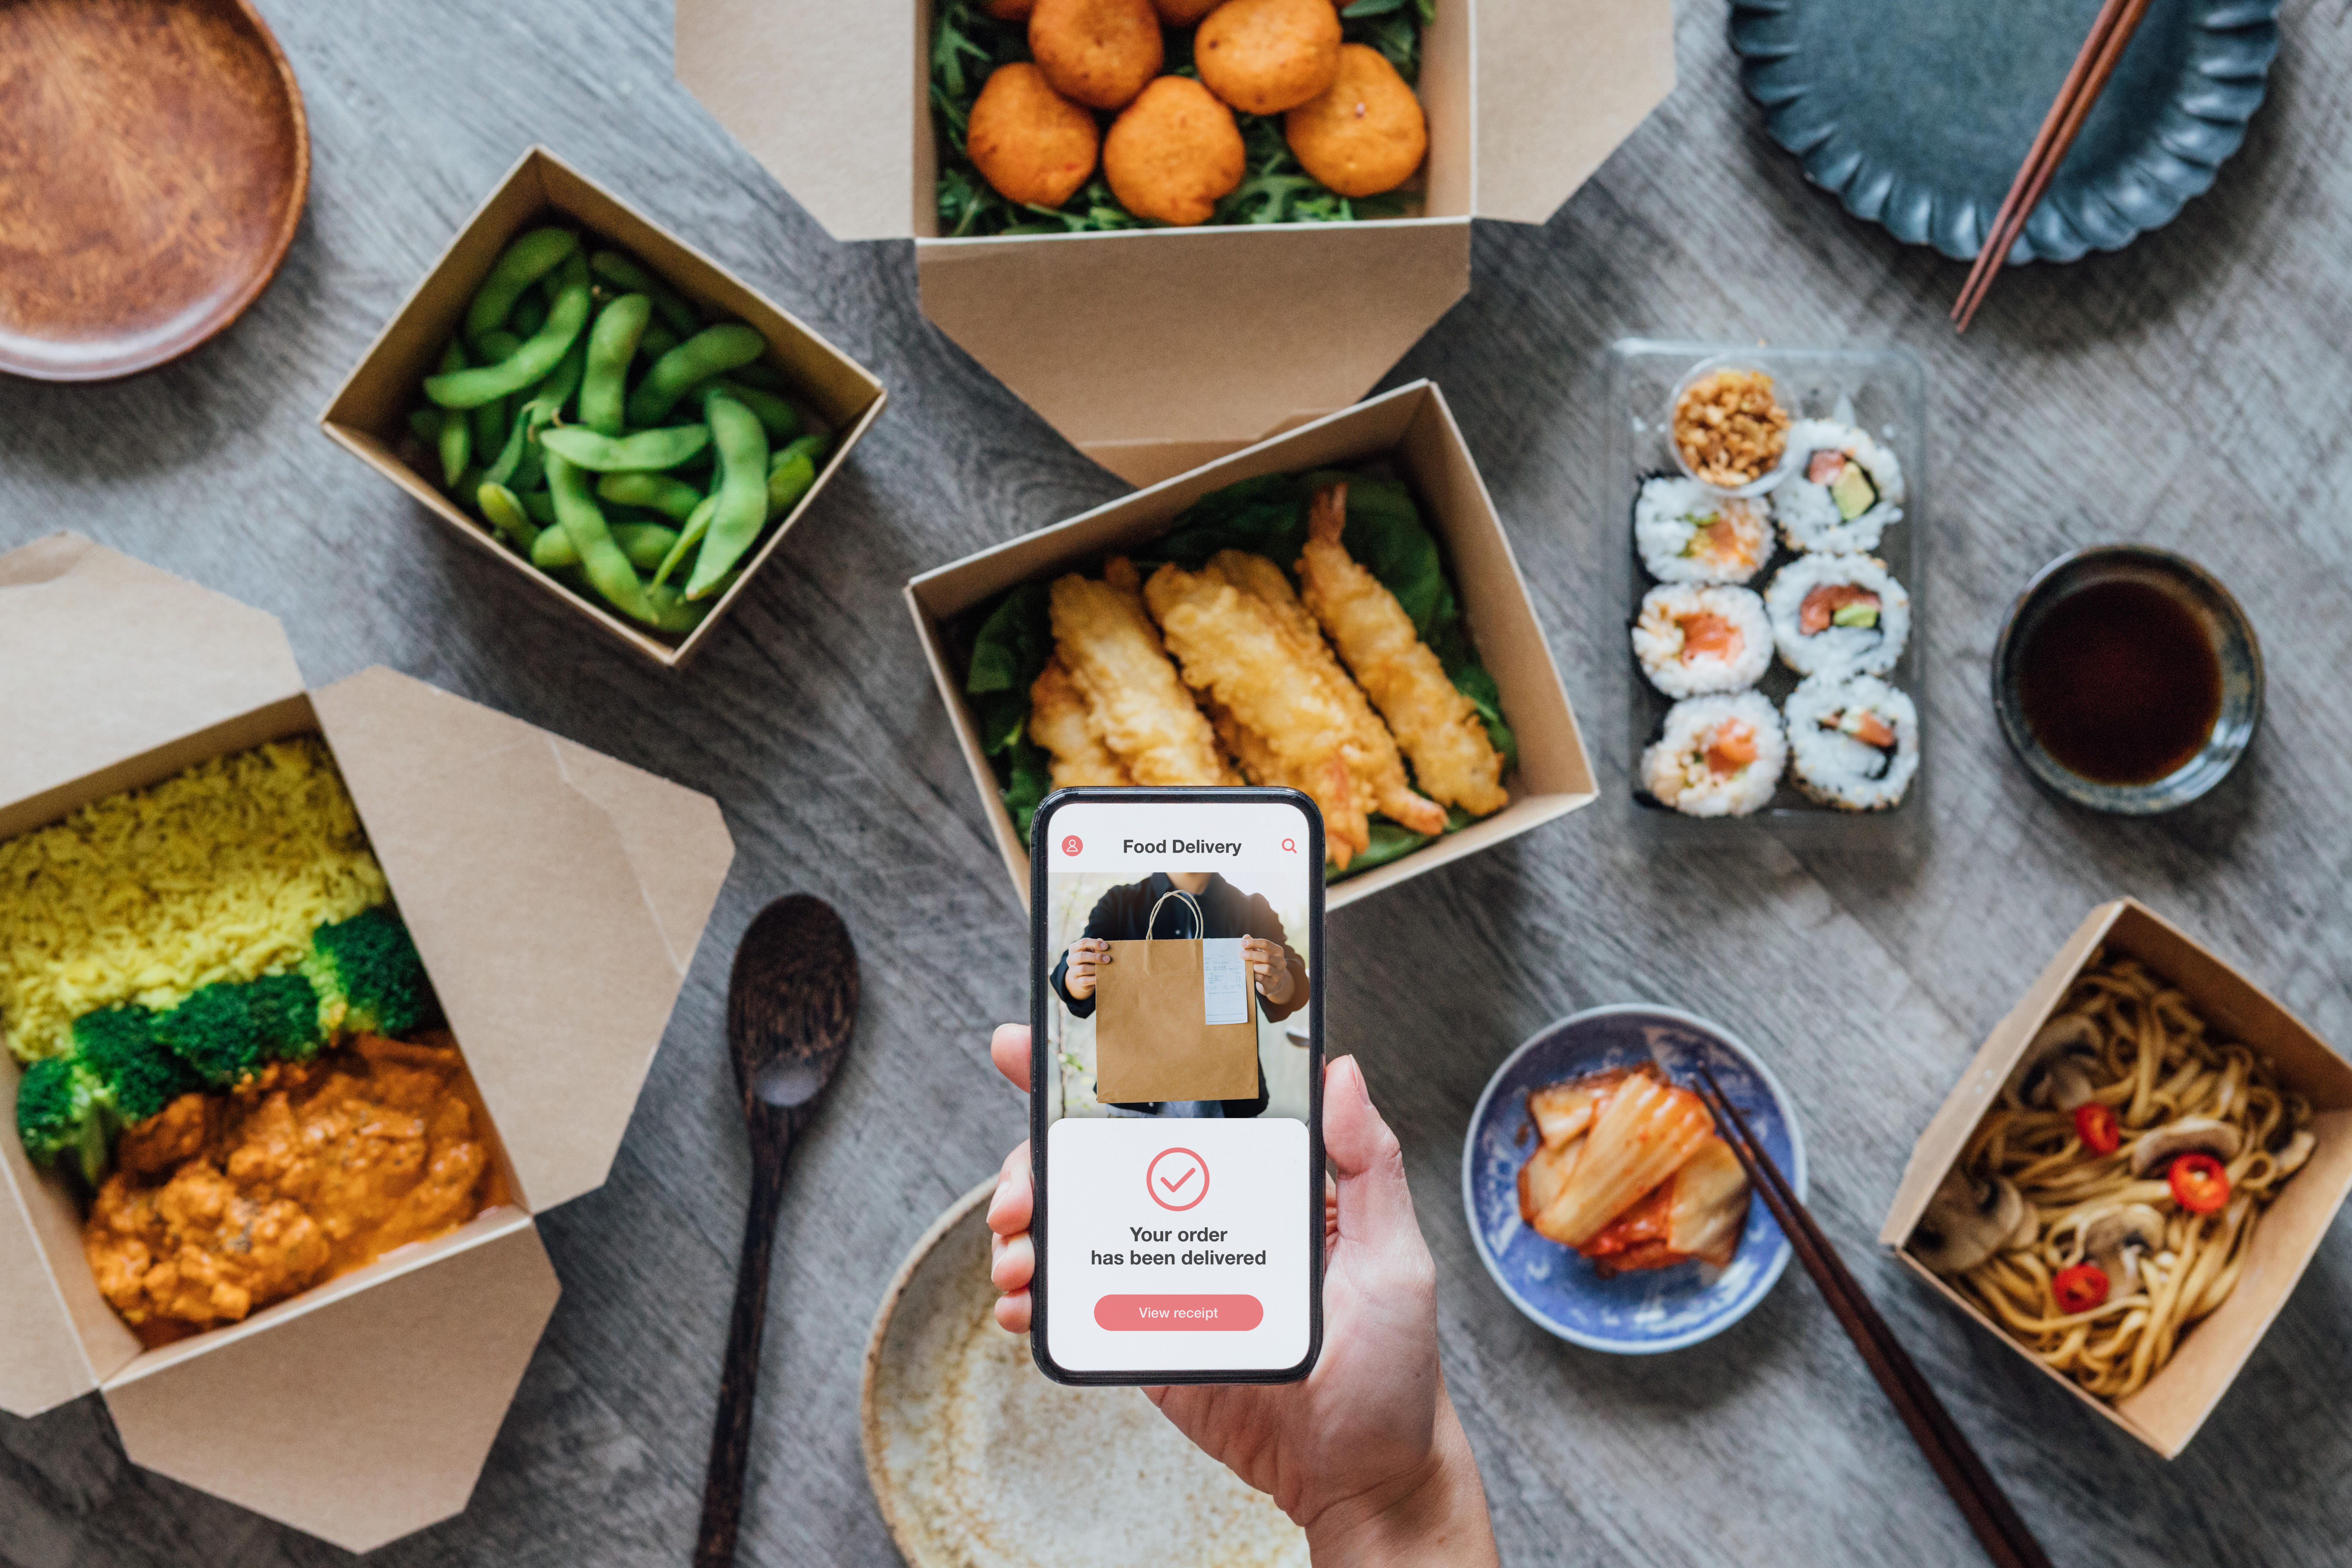 Food delivery apps say they’re saving restaurants. Instead they’re charging big fees